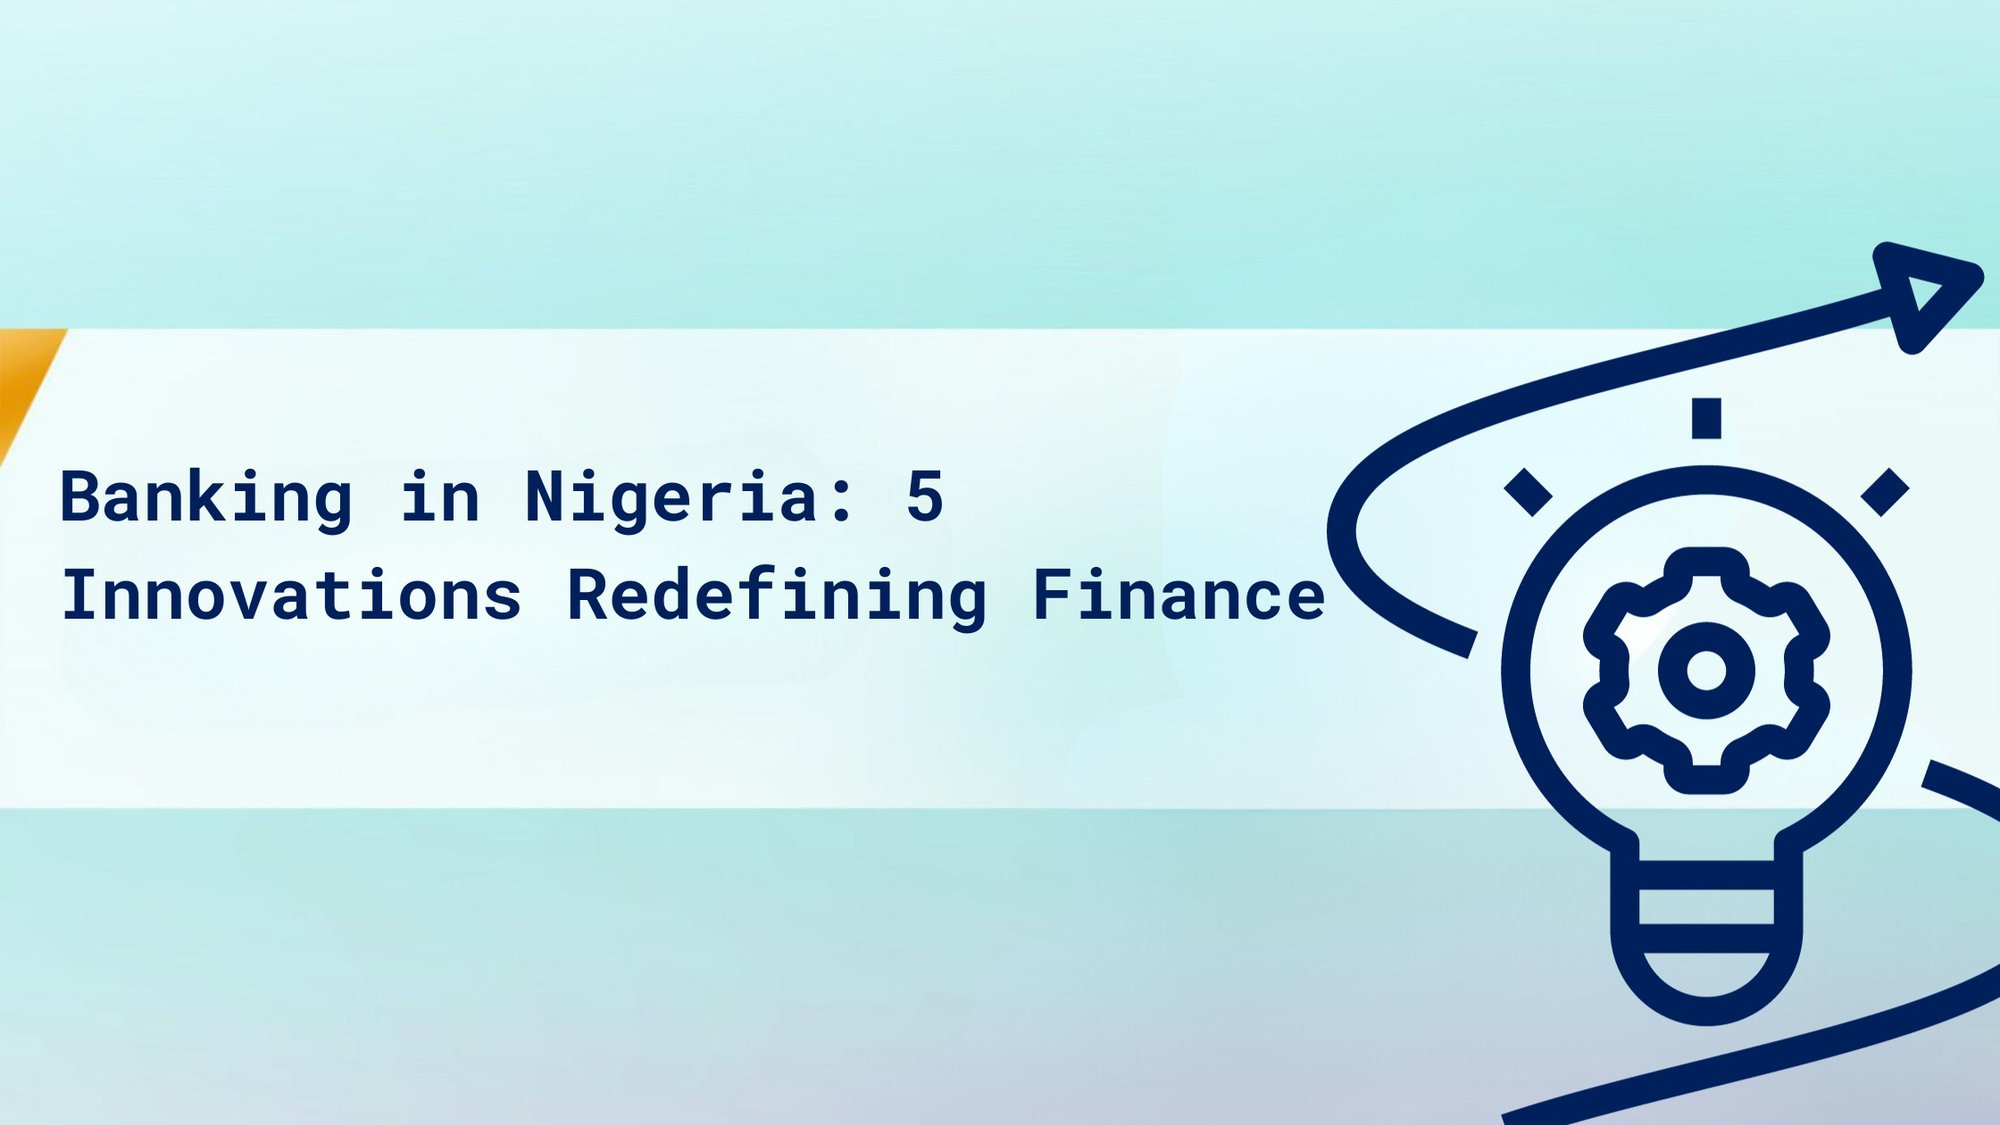 Banking in Nigeria: 5 Innovations Redefining the Finance cover